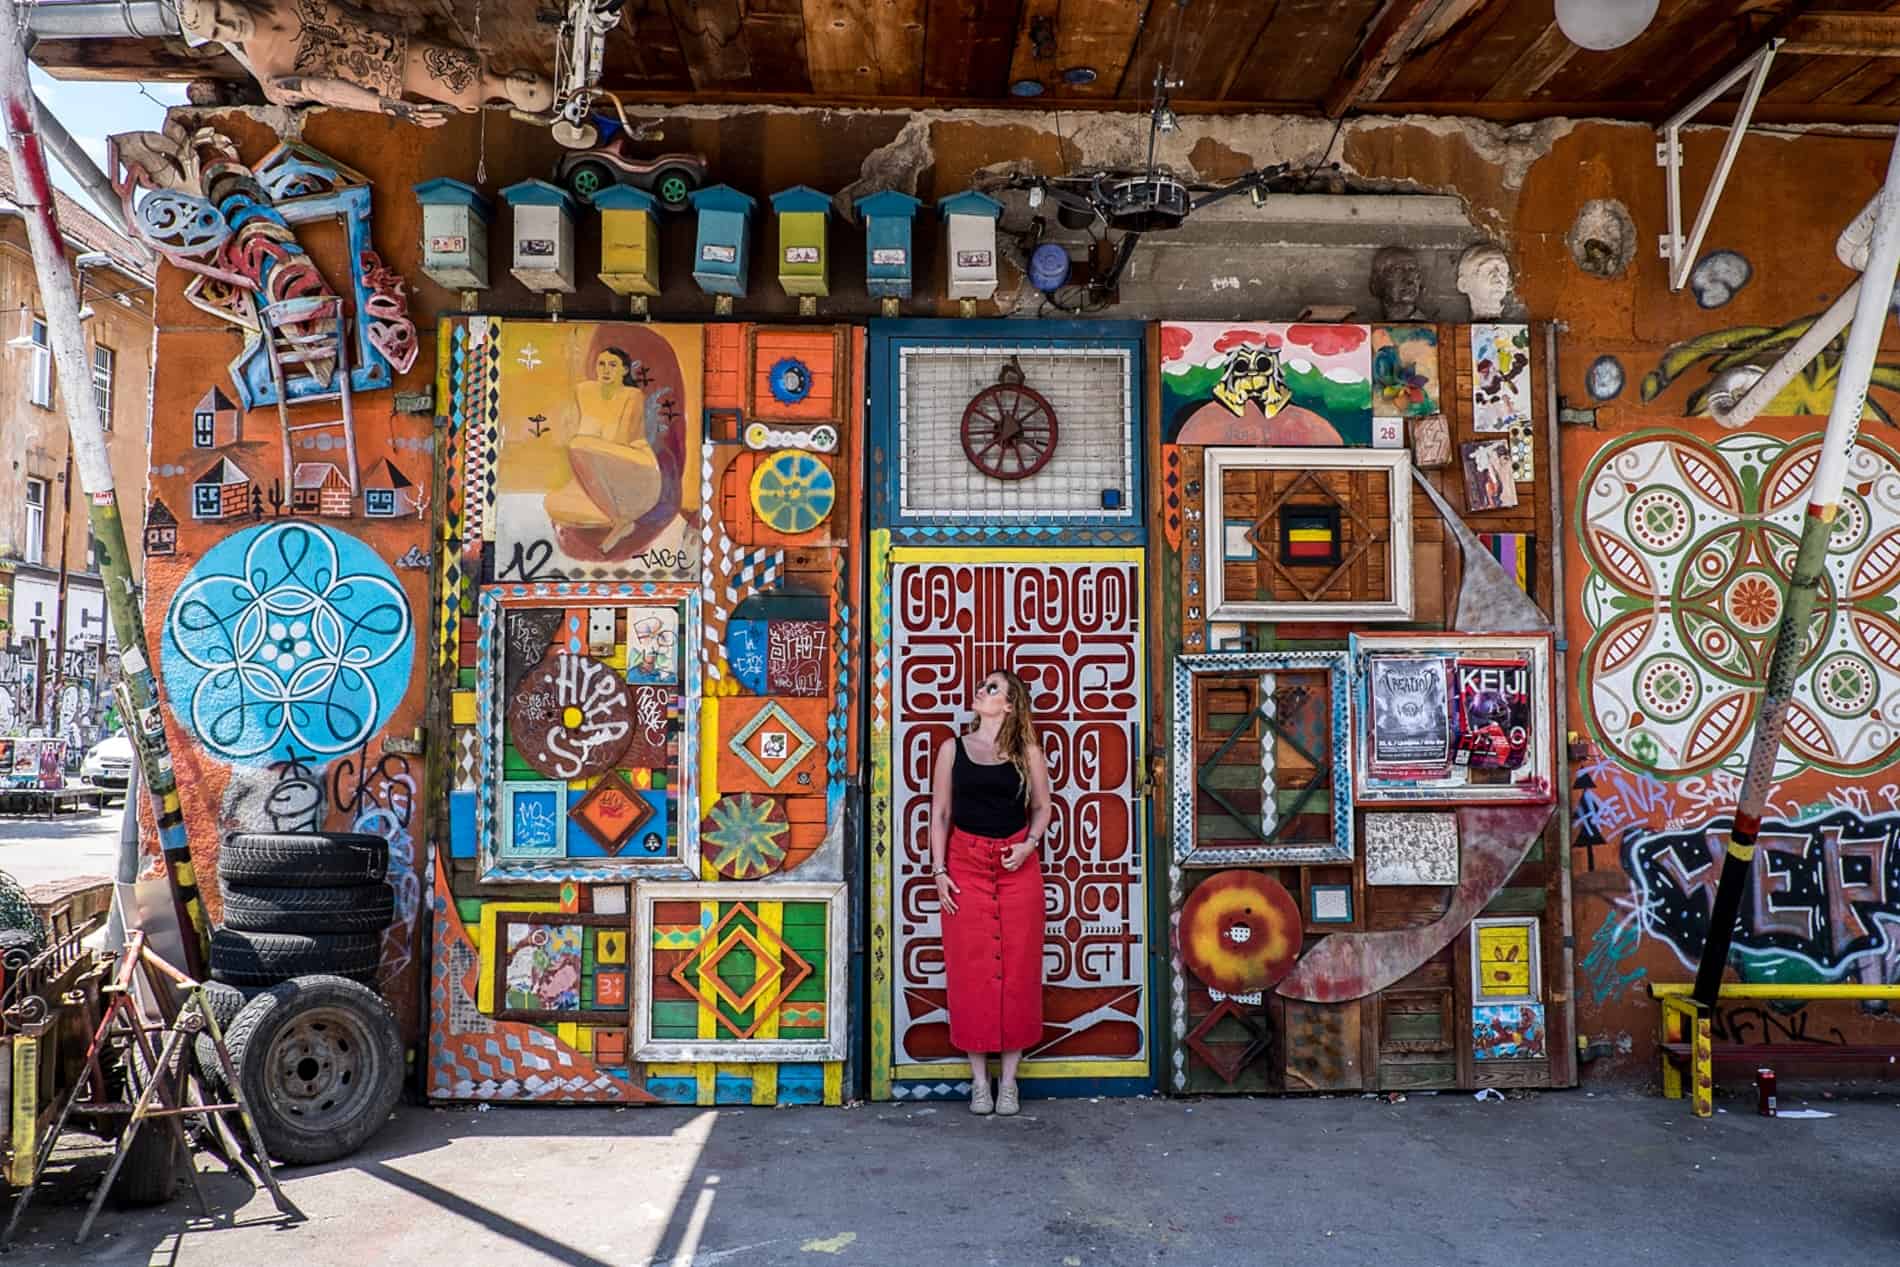 A woman in a red skirt stands in front of a decorated wall at one of the many art studios in Metelkova in Ljubljana.